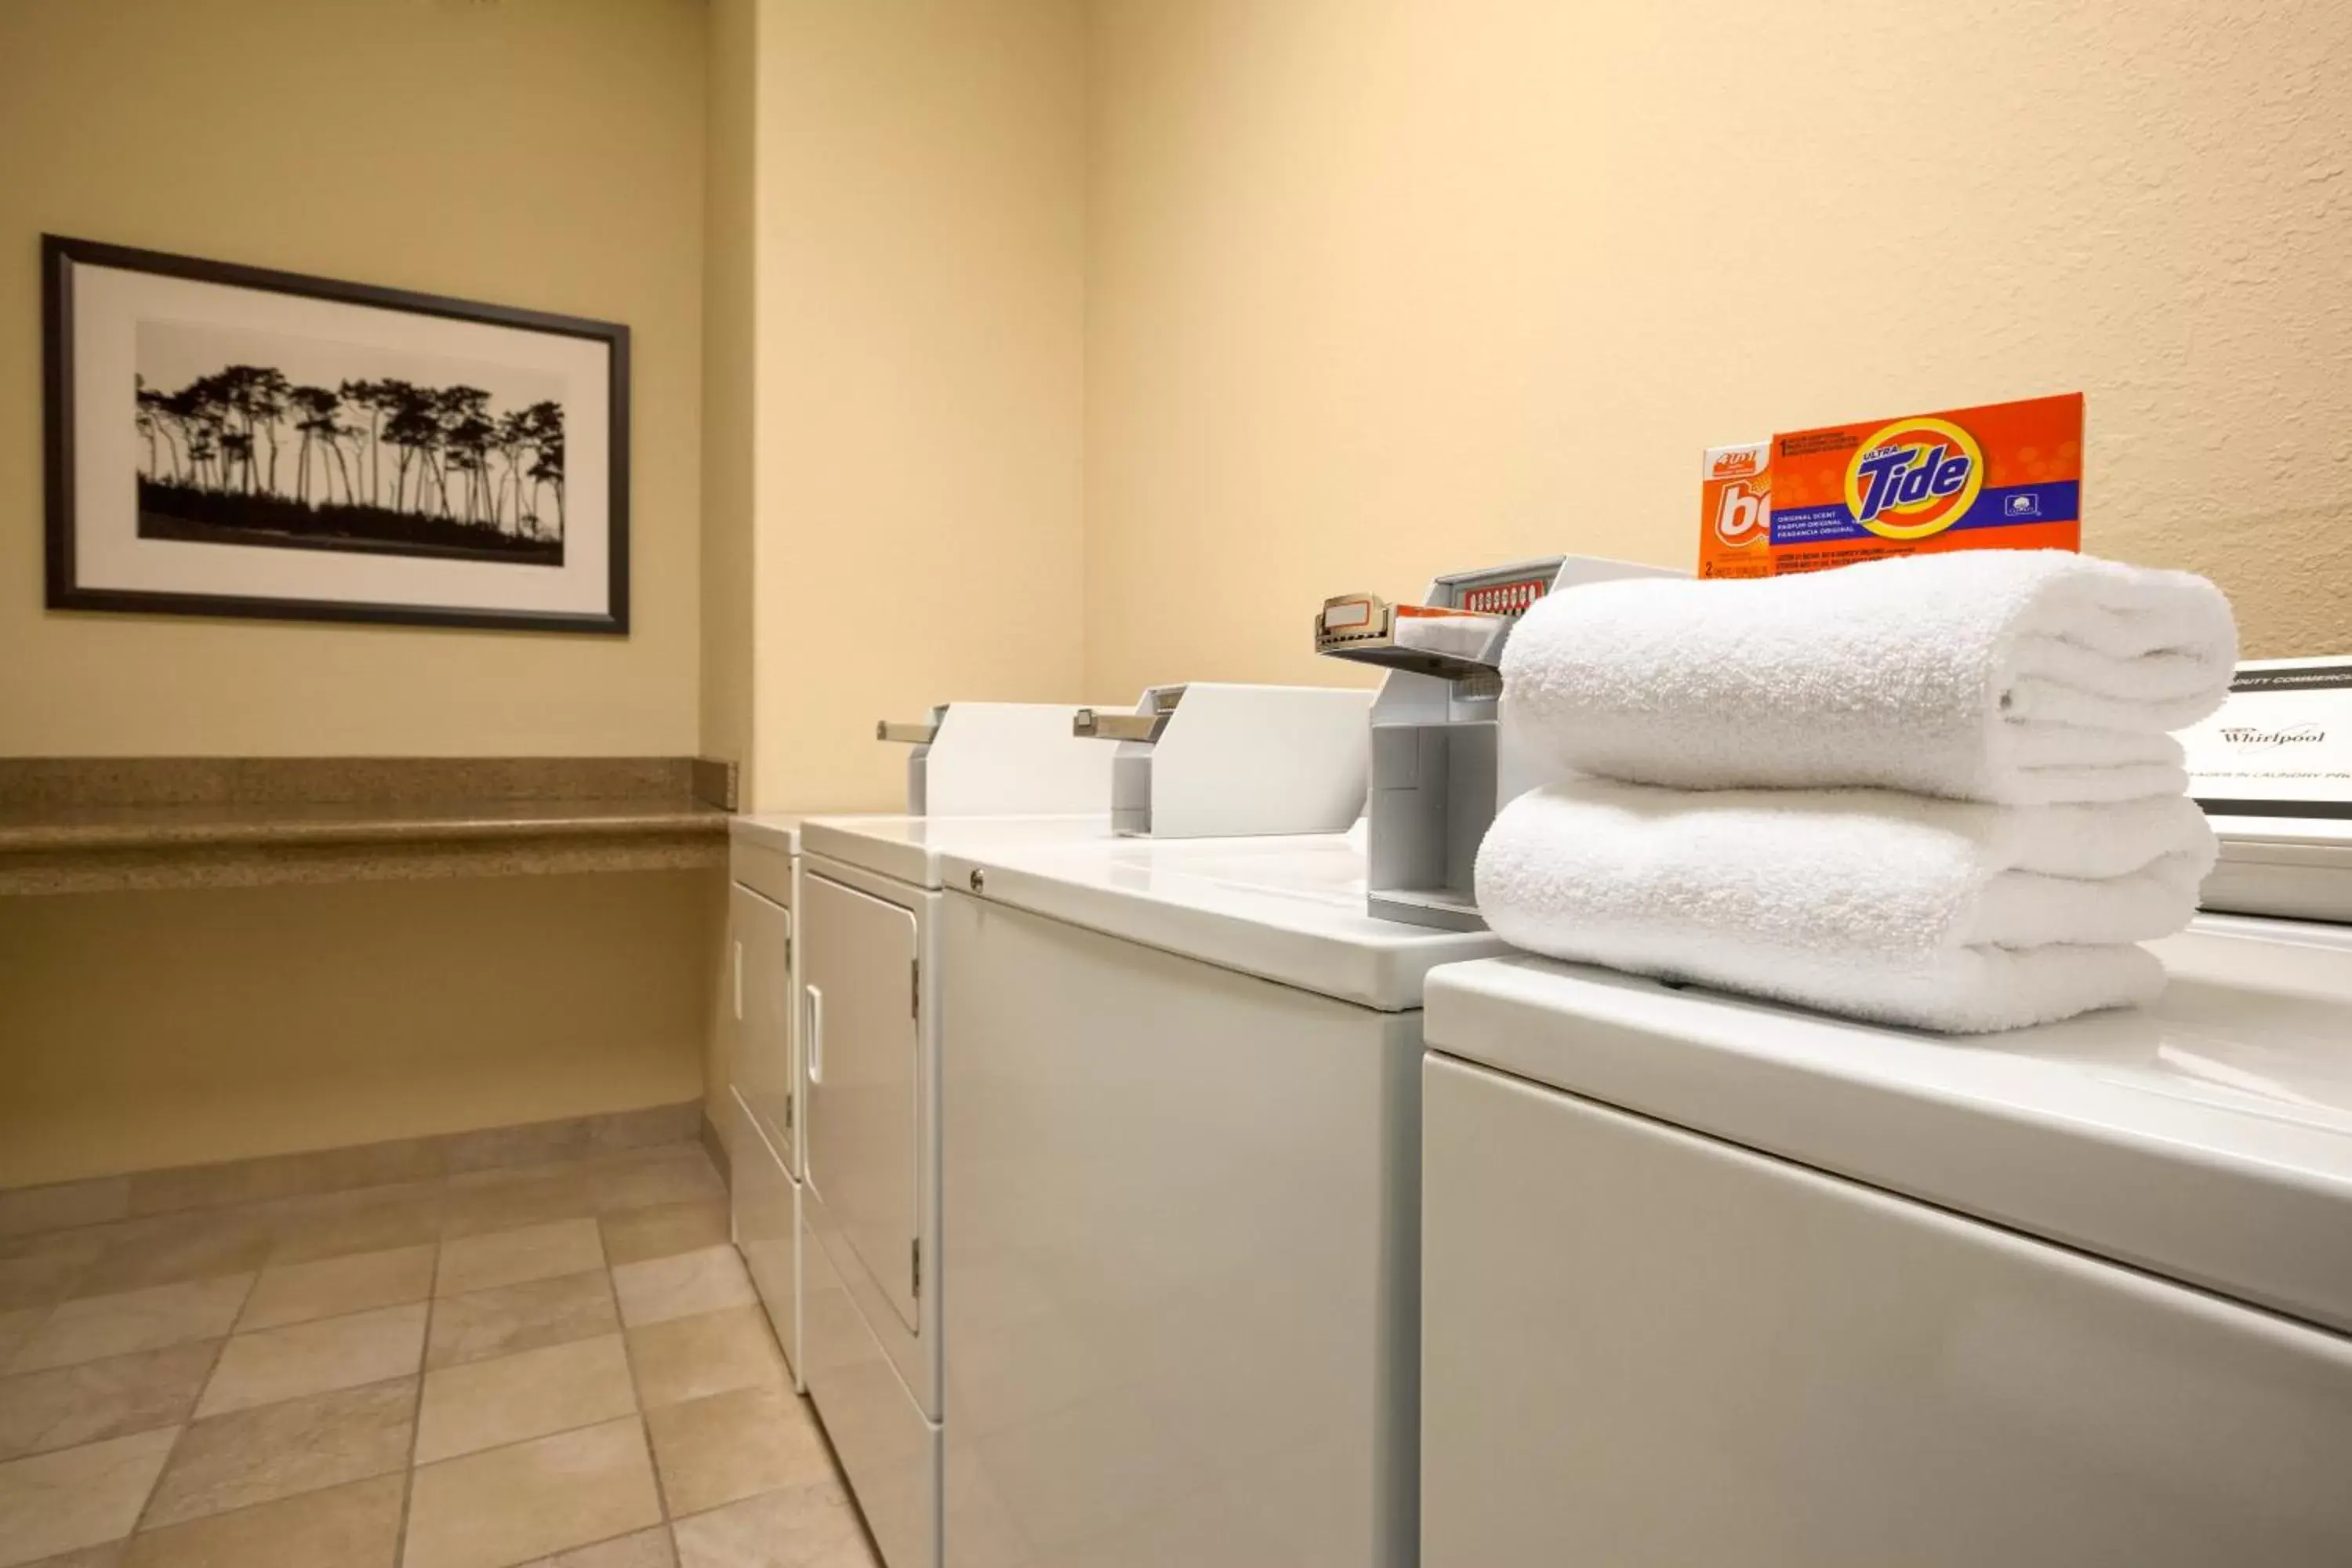 Area and facilities in Country Inn & Suites by Radisson, Marion, OH